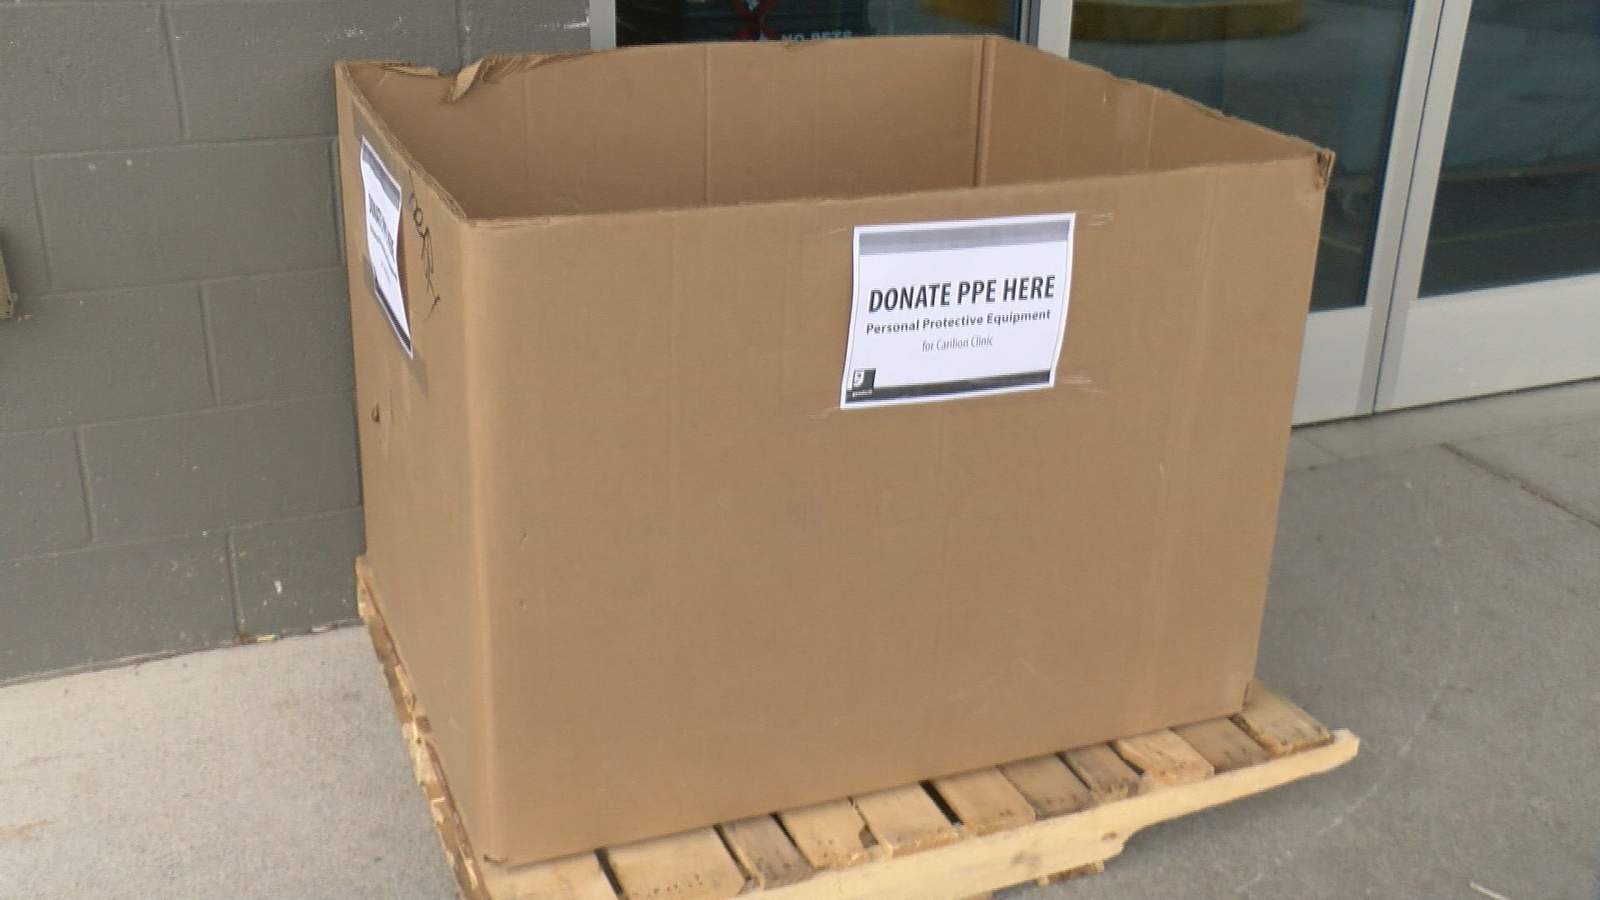 Local Goodwill stores collecting medical supplies for Carilion